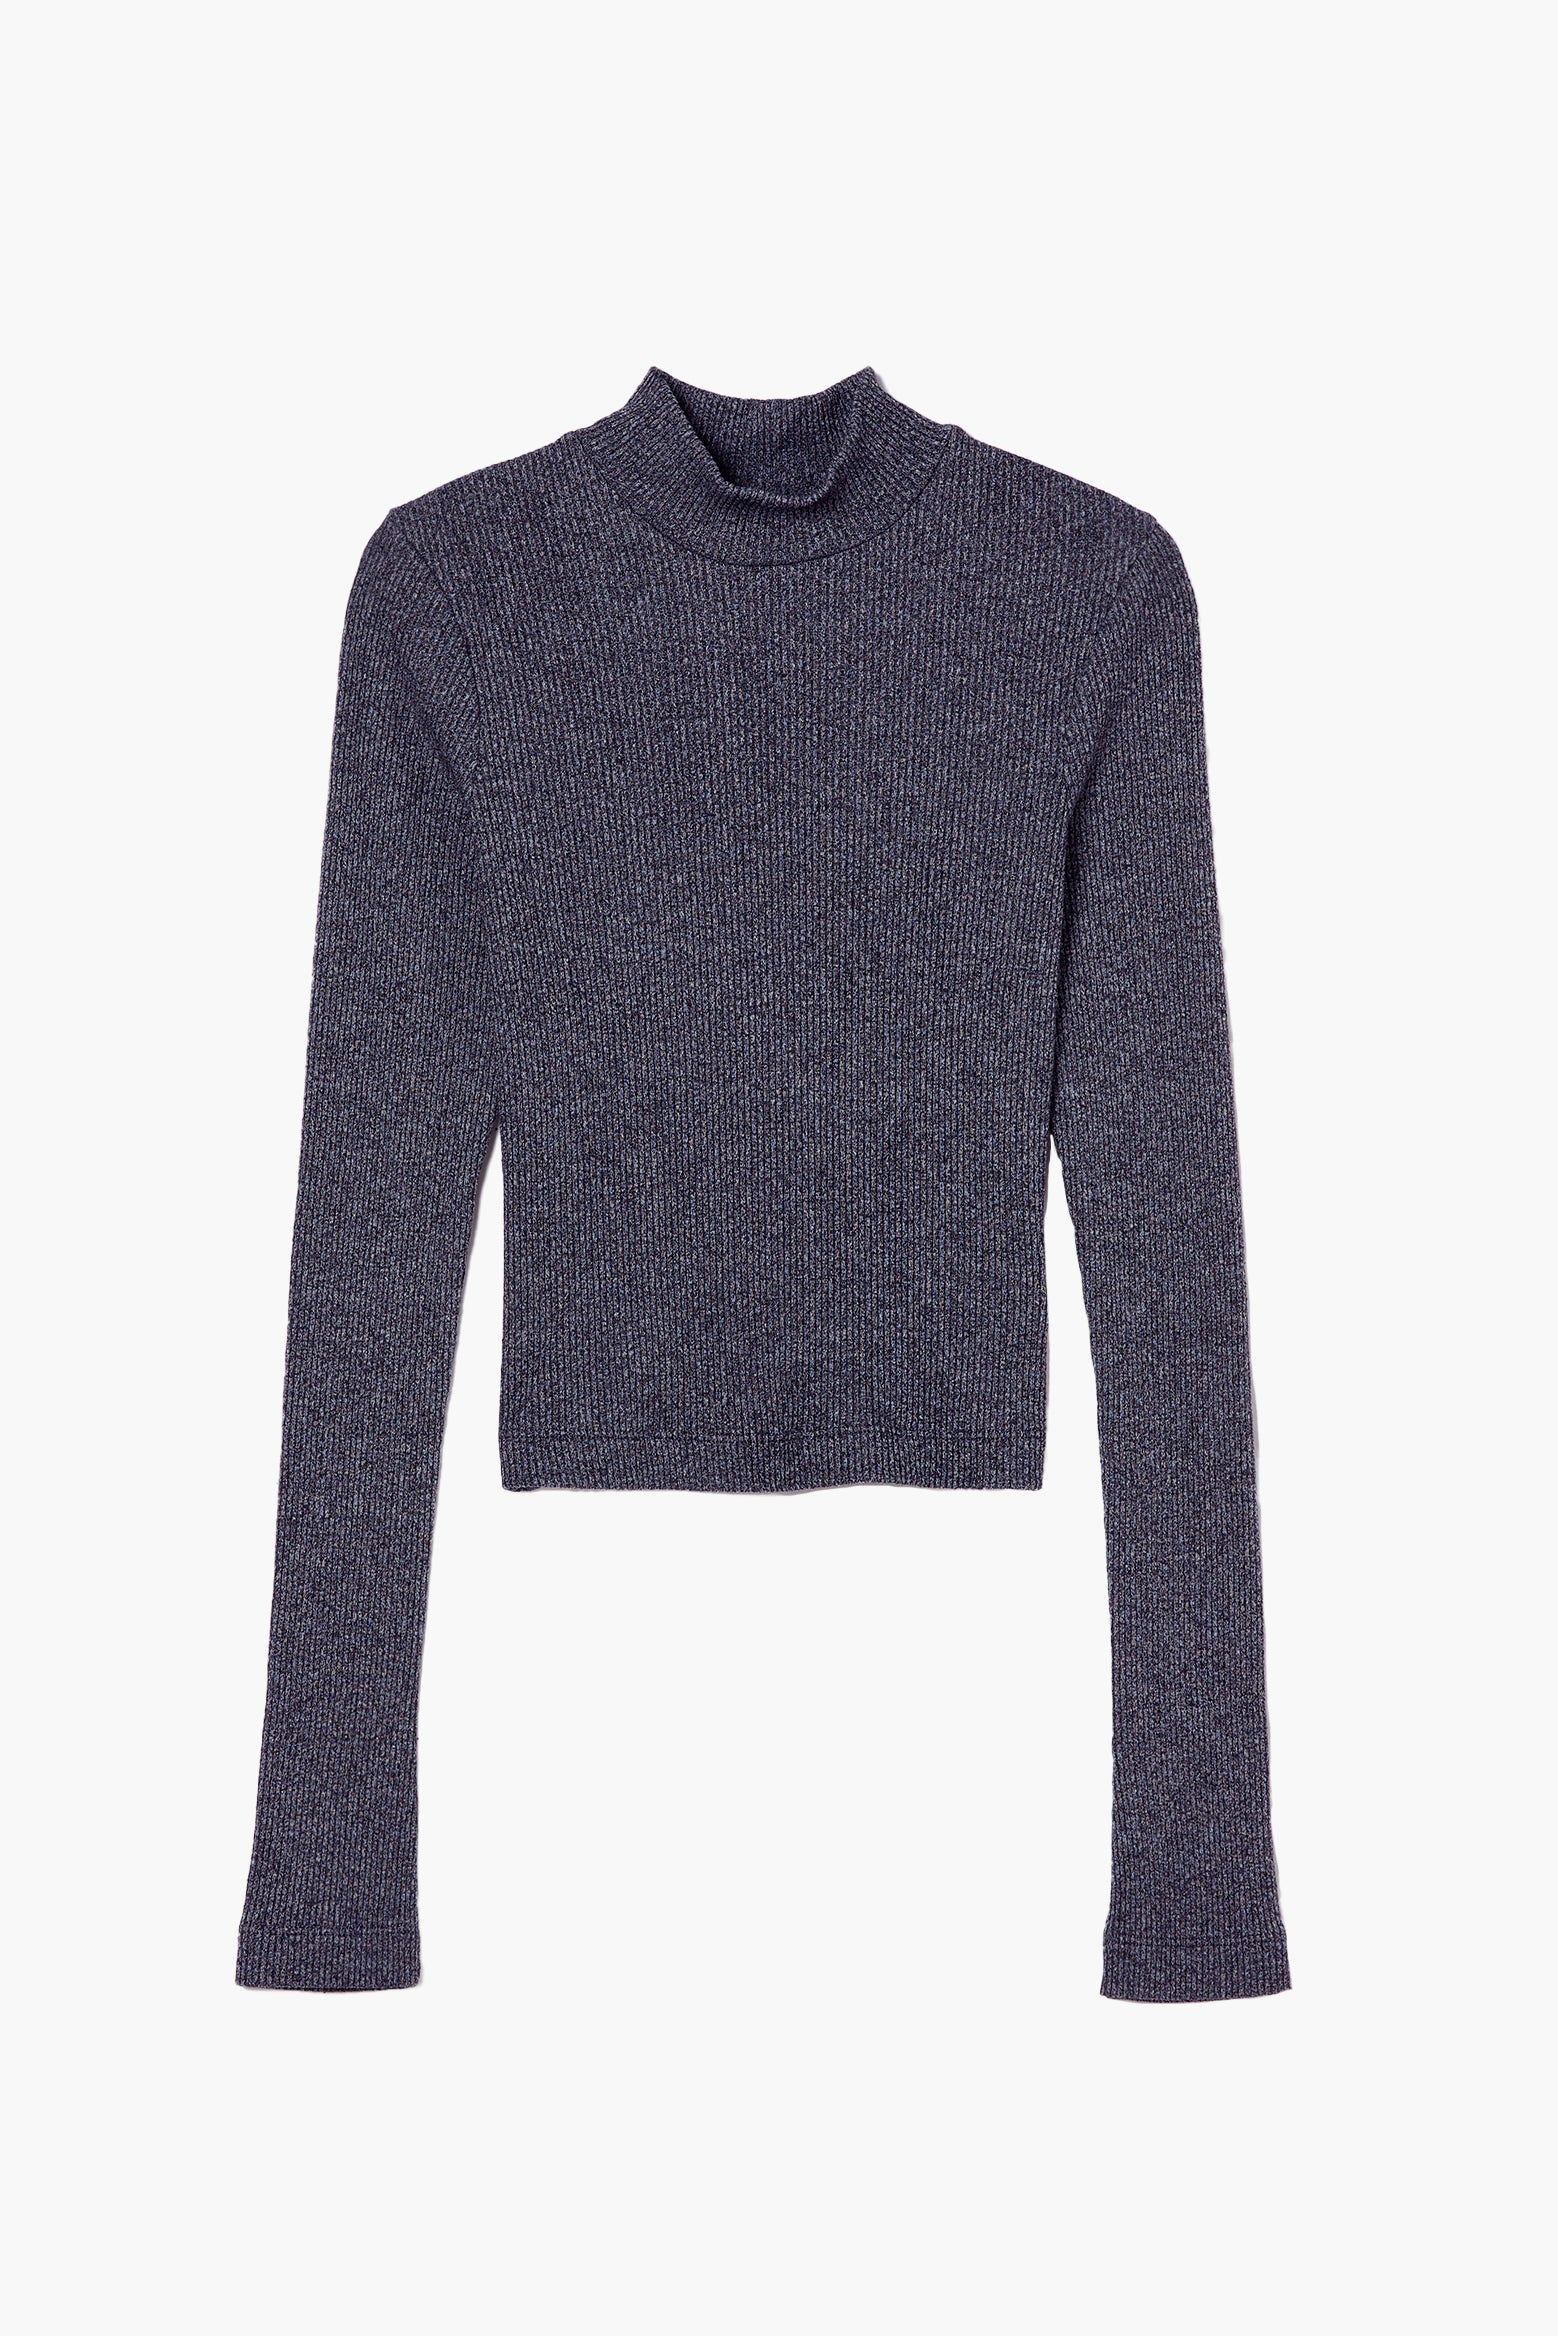 Citizens Of Humanity Annatole Mock Neck in Charcoal available at The New Trend Australia. 